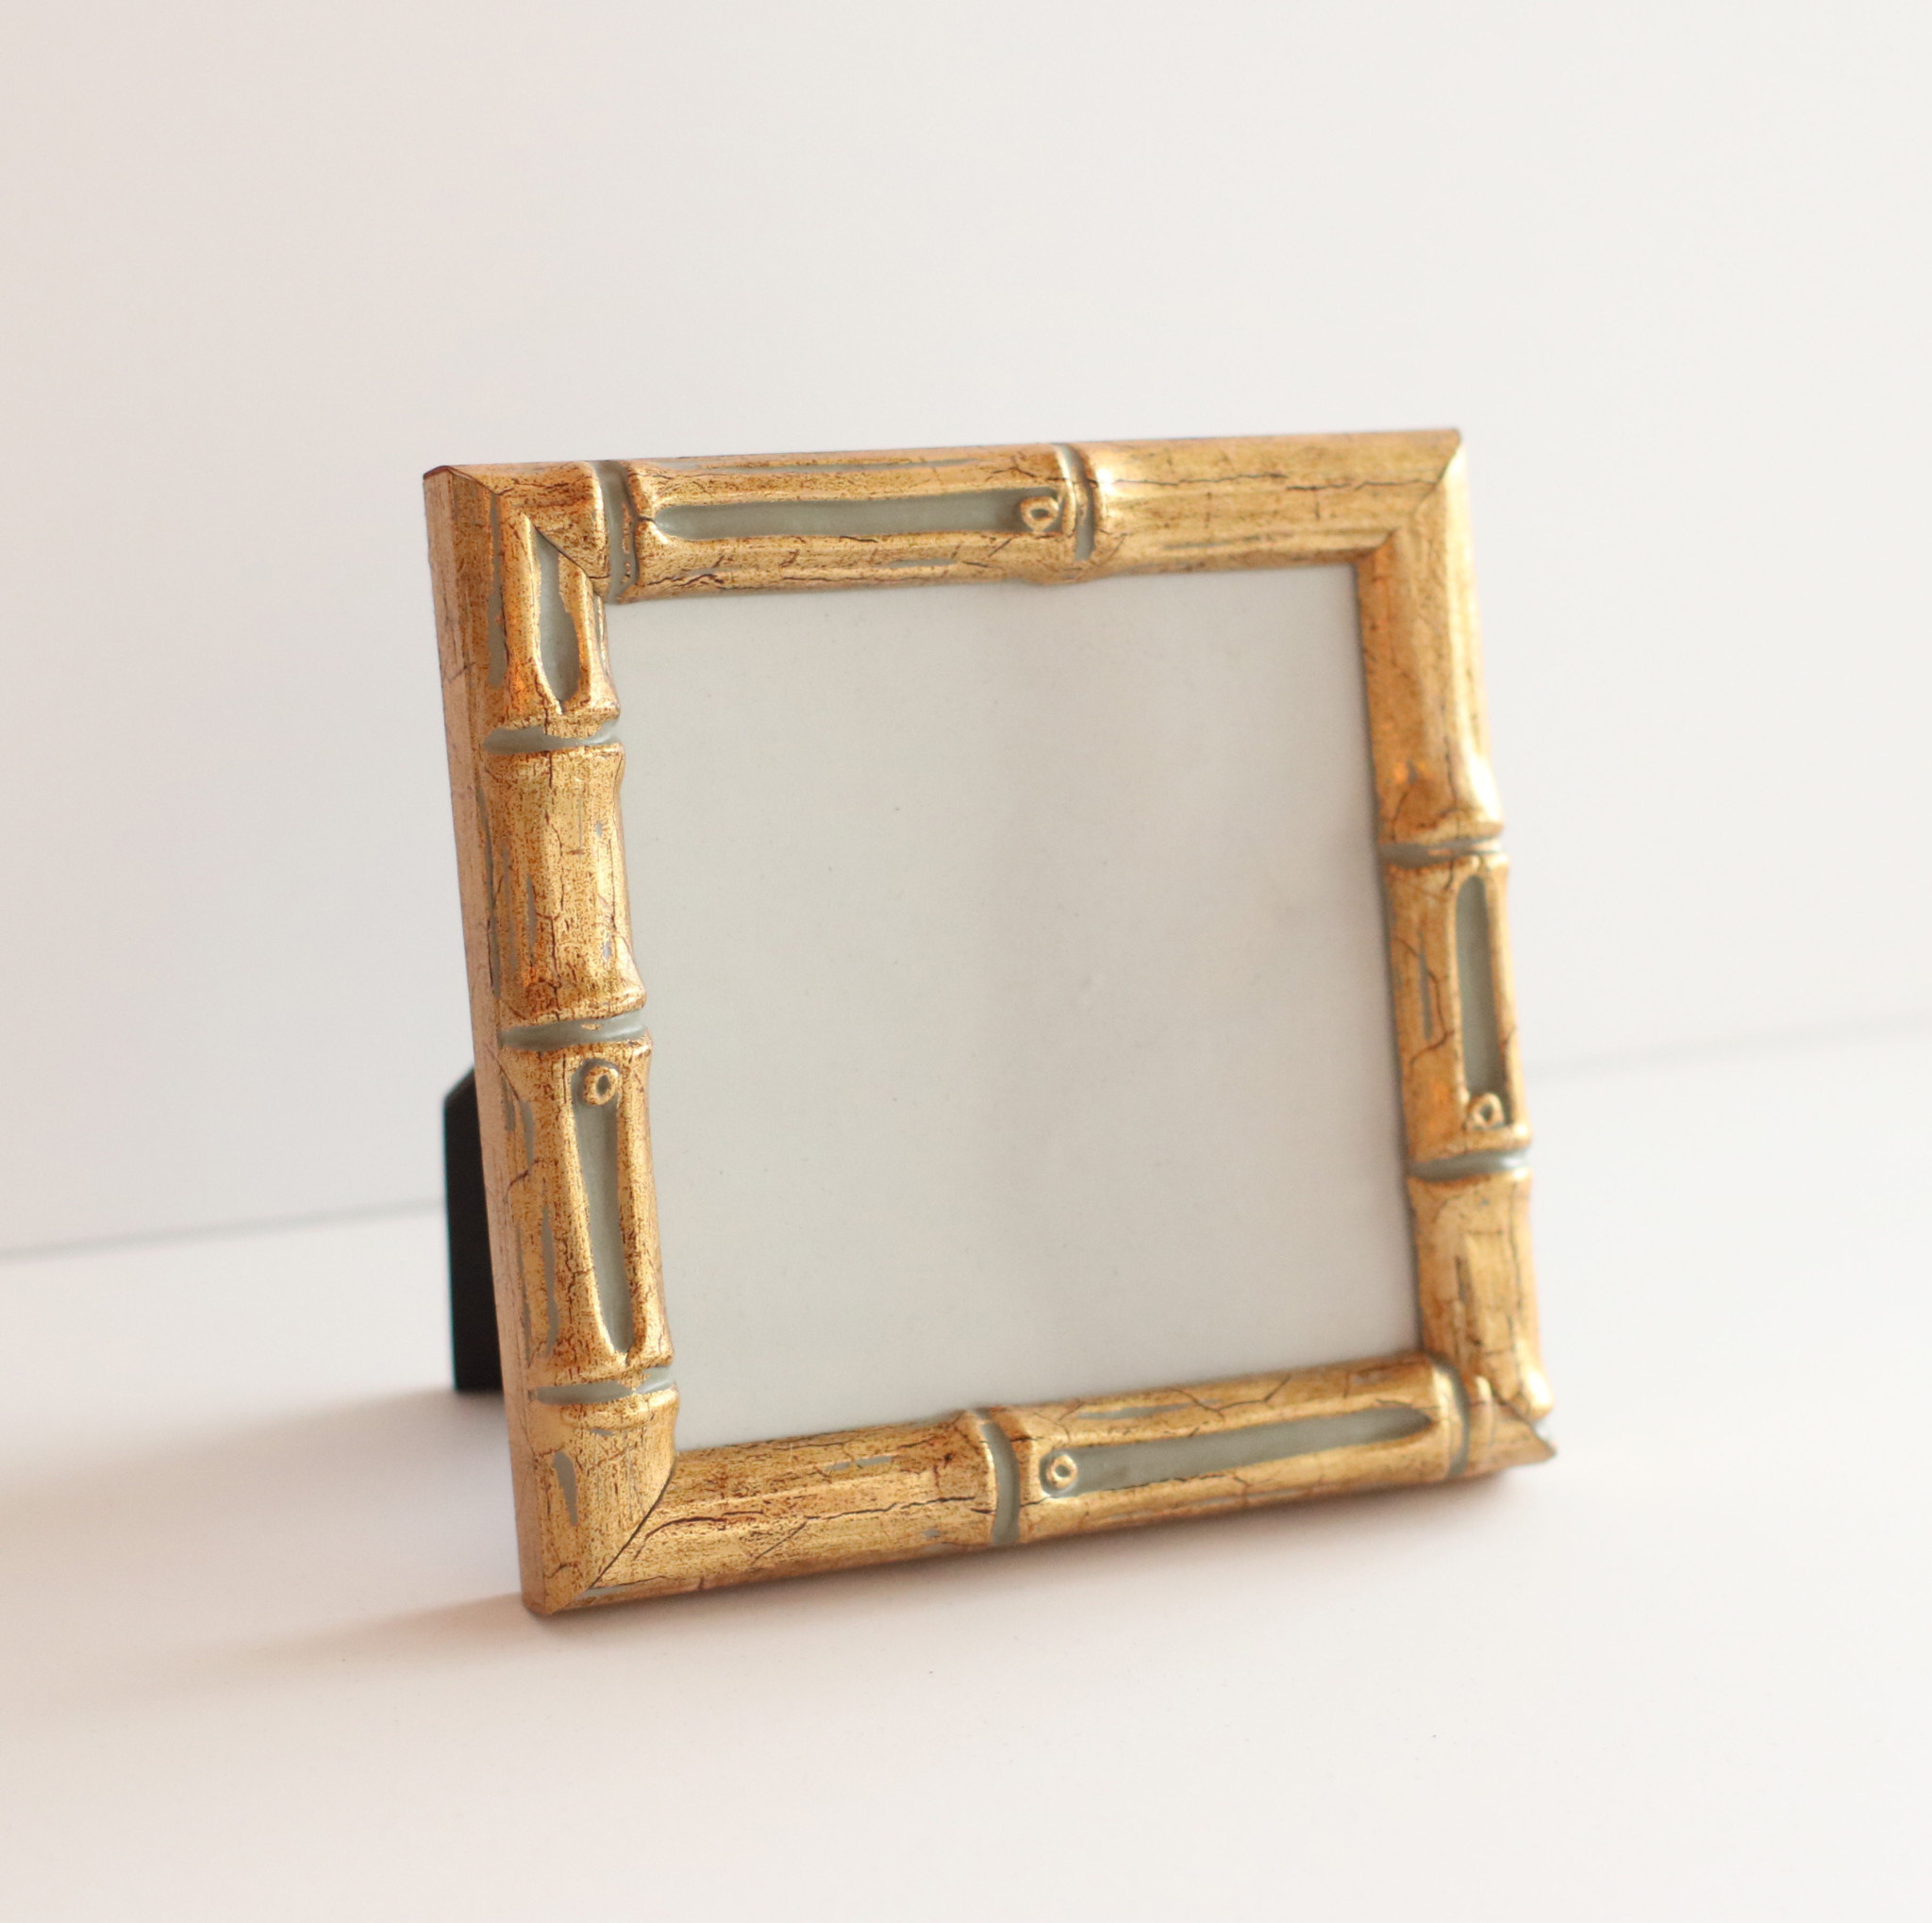 Brynn Gold Bamboo Border 4 x 6 Photo Frames in Assorted Colors